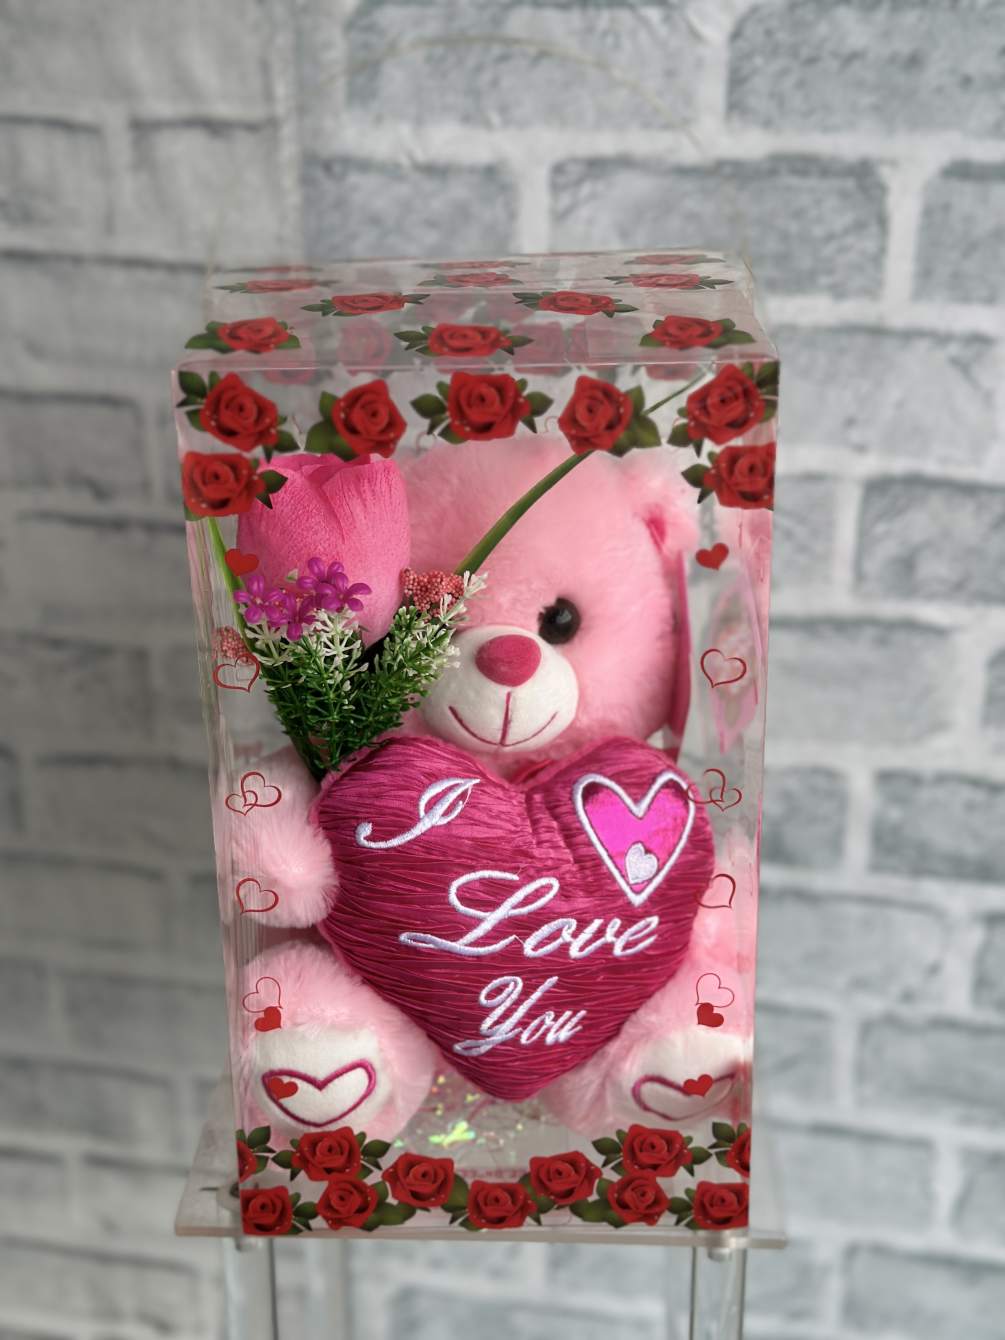 Little teddy bear, holding your rose and a heart in a clear